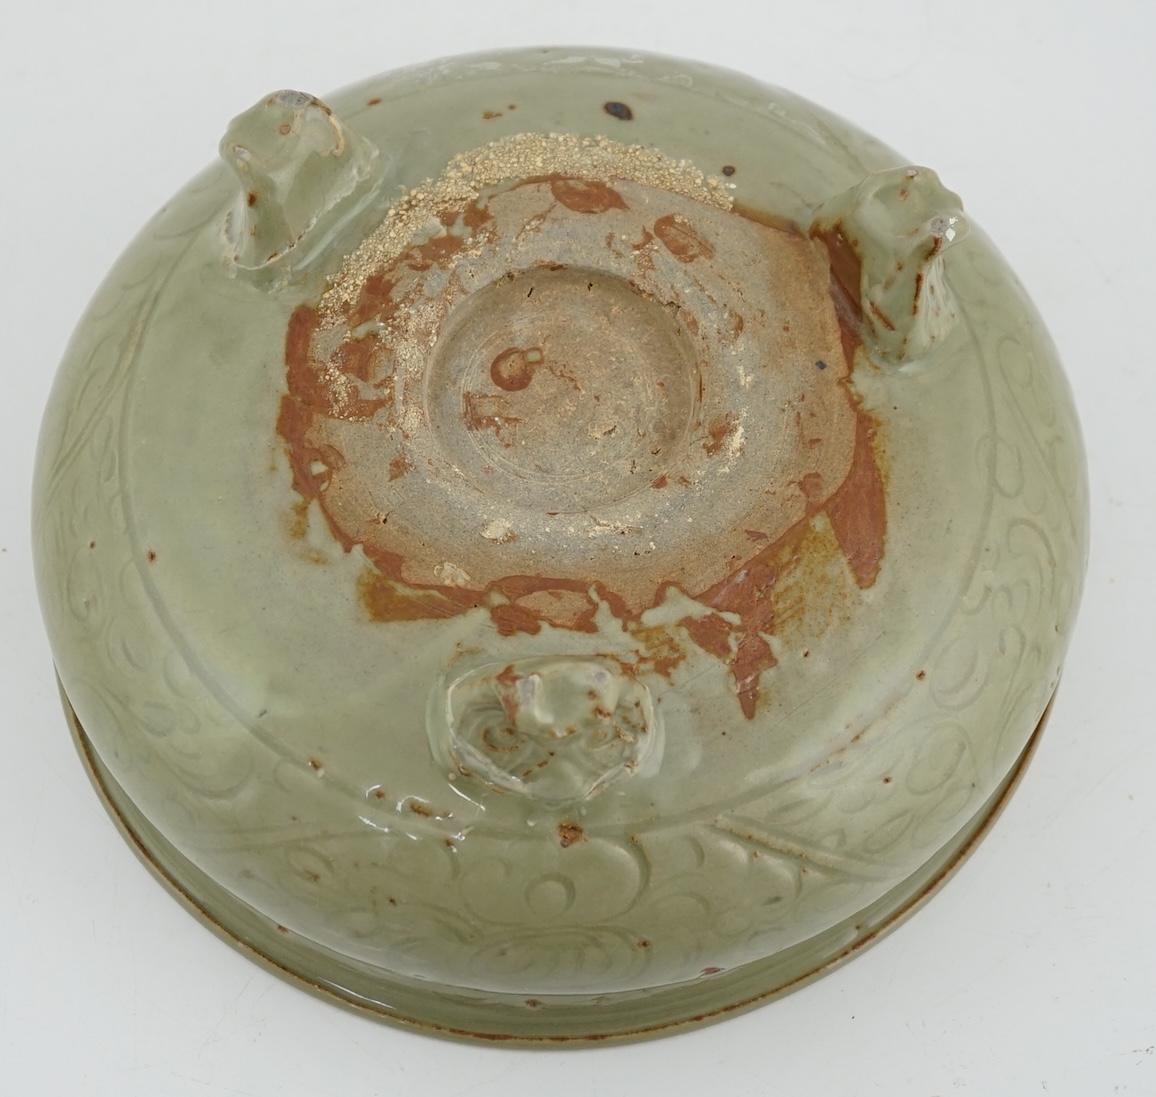 A Chinese Ming Longquan celadon tripod censer, 14th/15th century, some damage